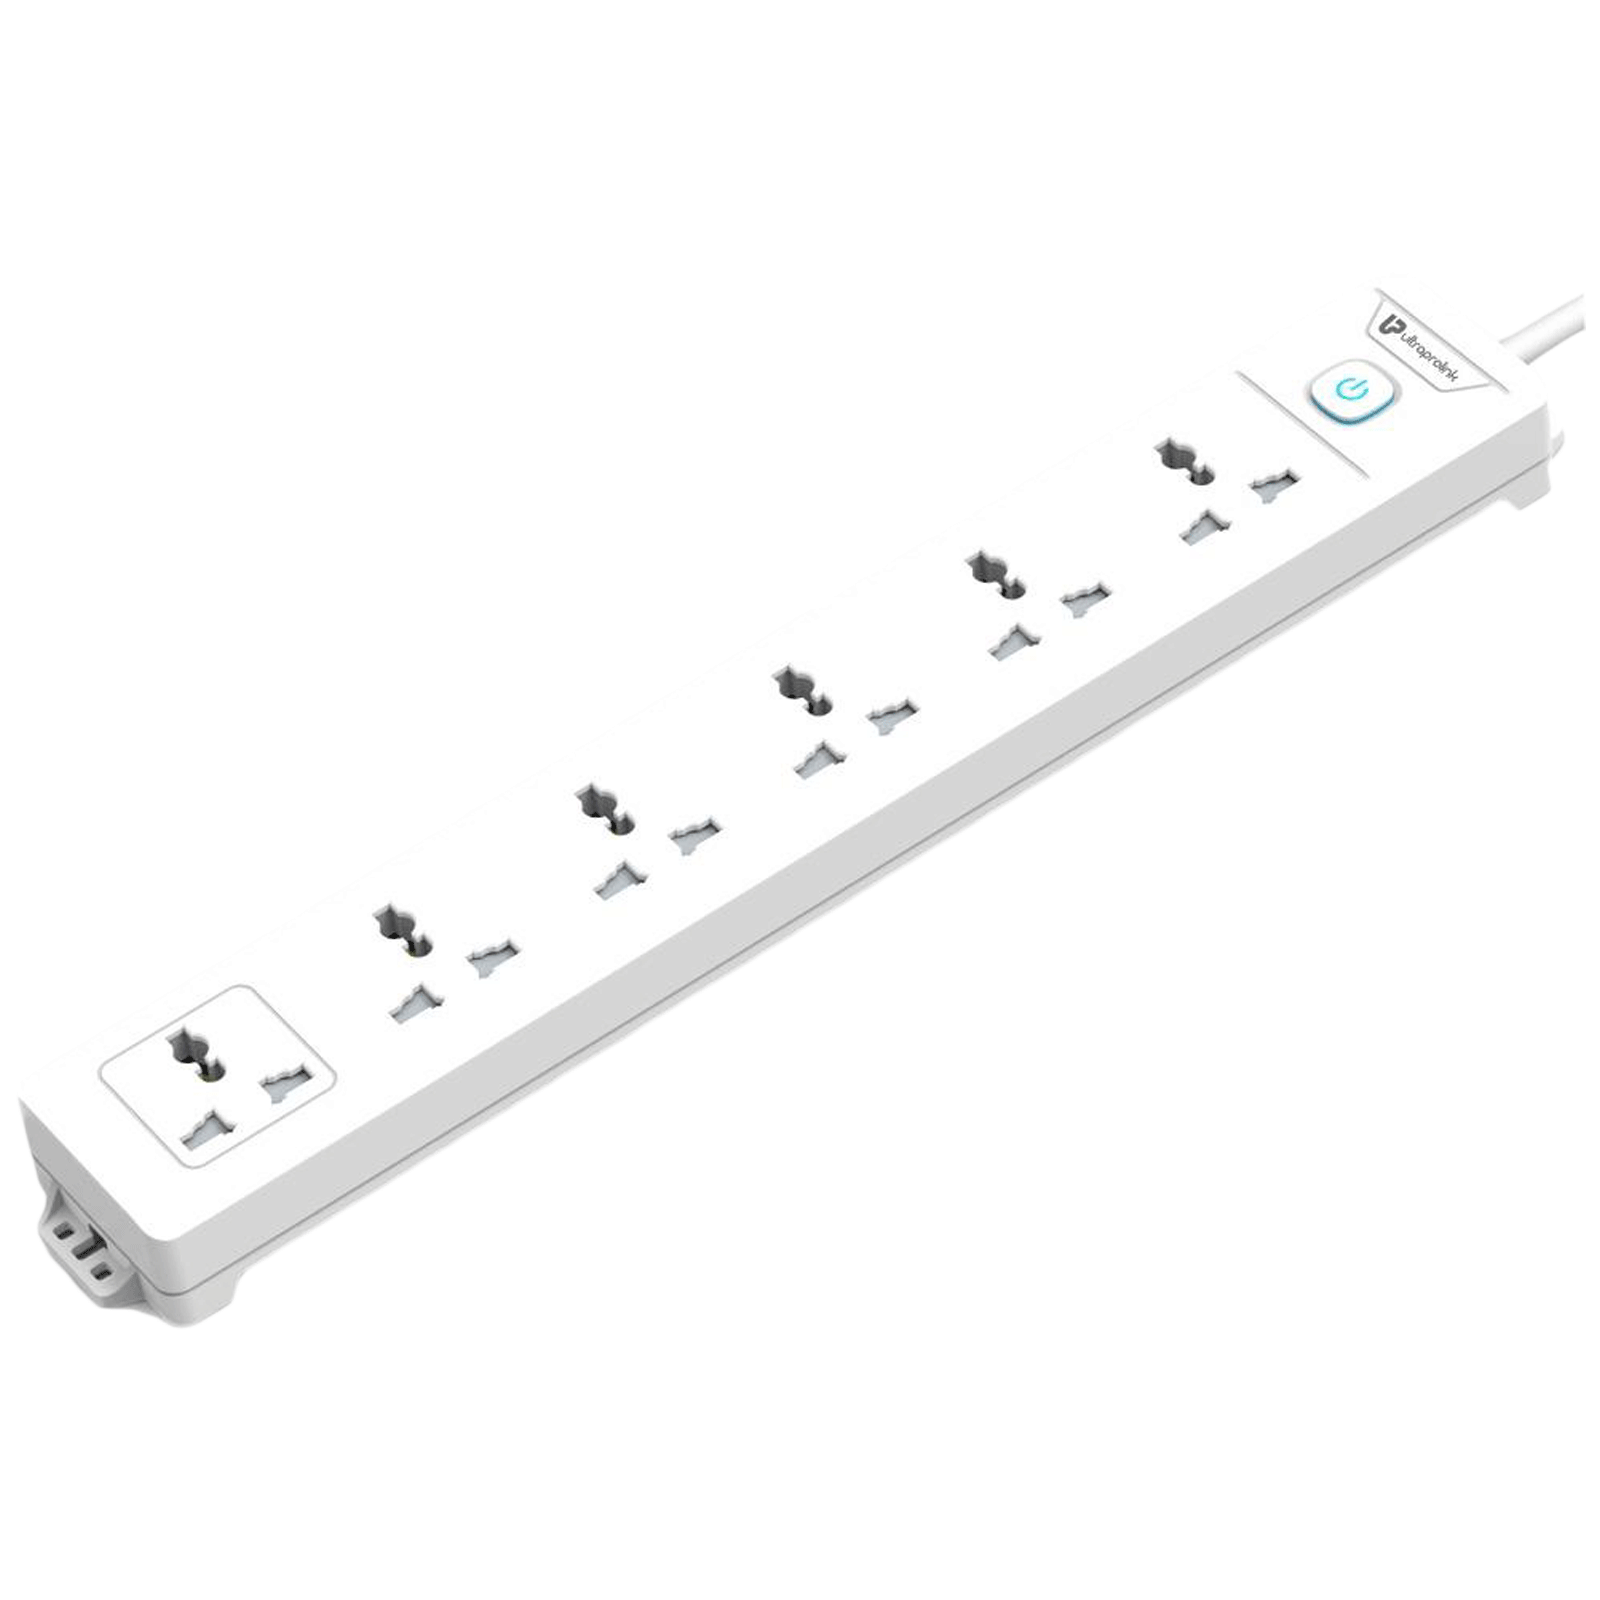 ultraprolink 10000 Amps 6 Sockets Surge Protector With Individual Switch (2 Meters, Fire Retardant Material, UM1048, White)